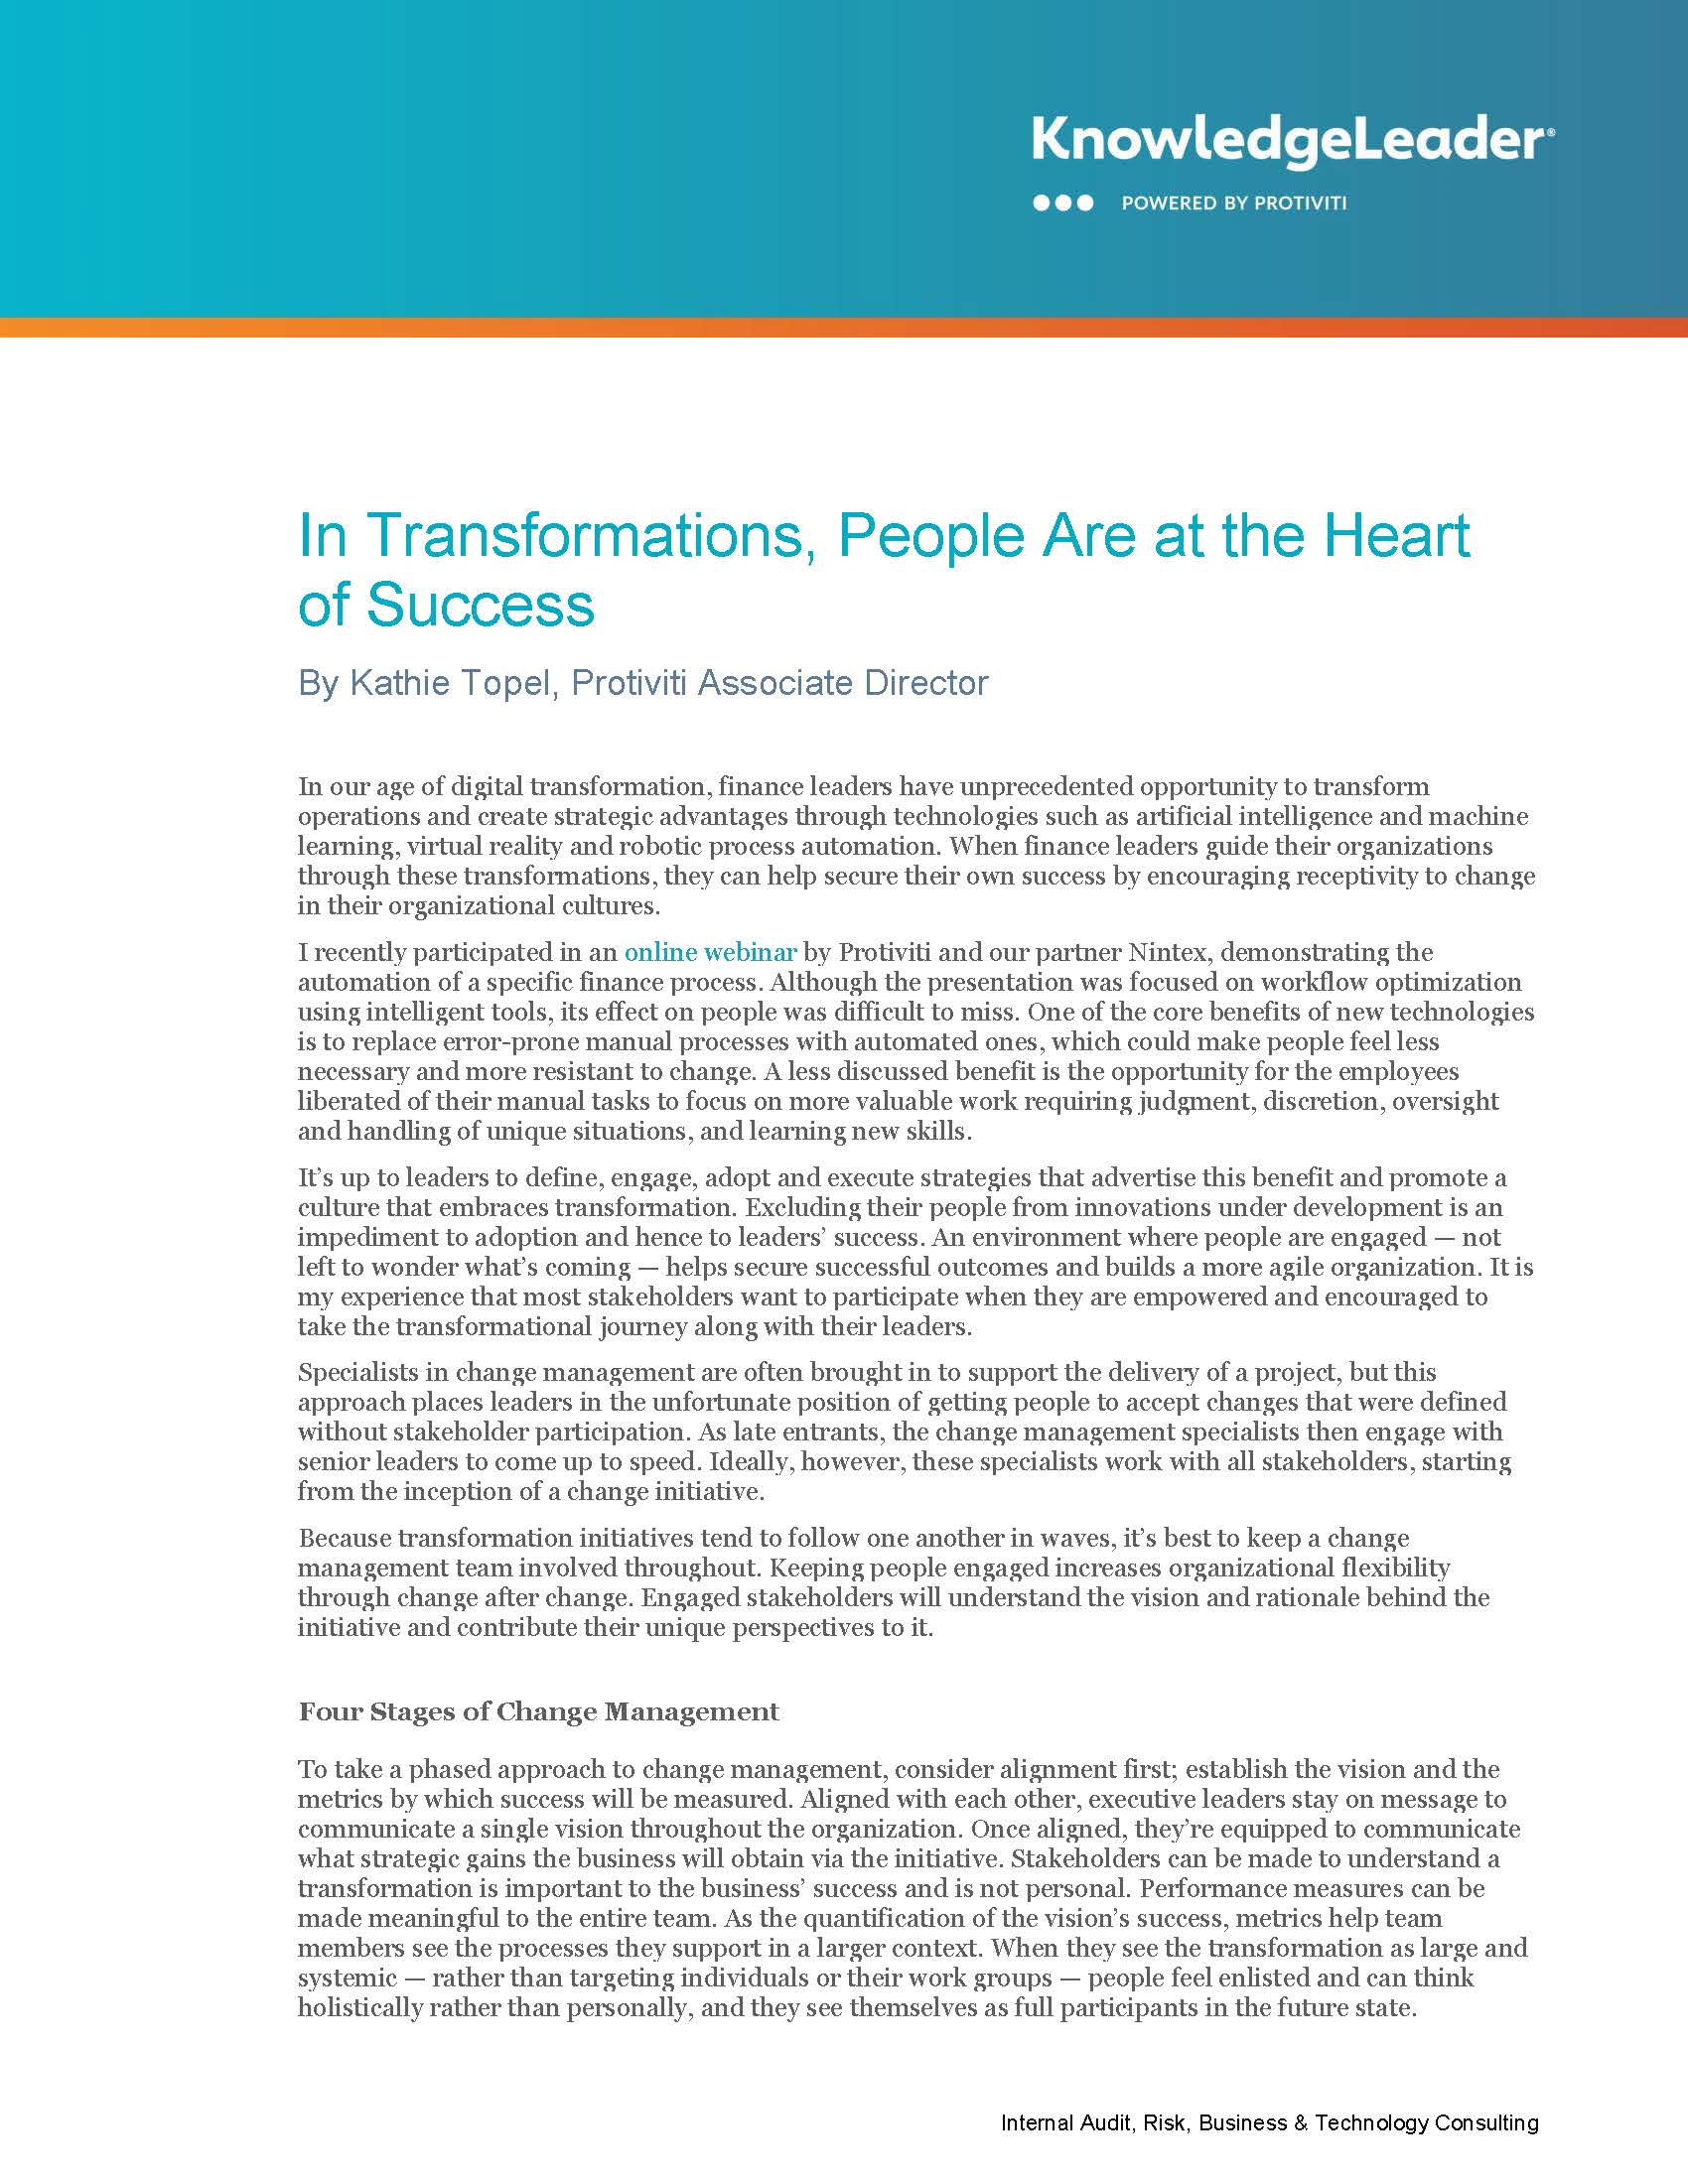 Screenshot of the first page of In Transformations, People Are at the Heart of Success